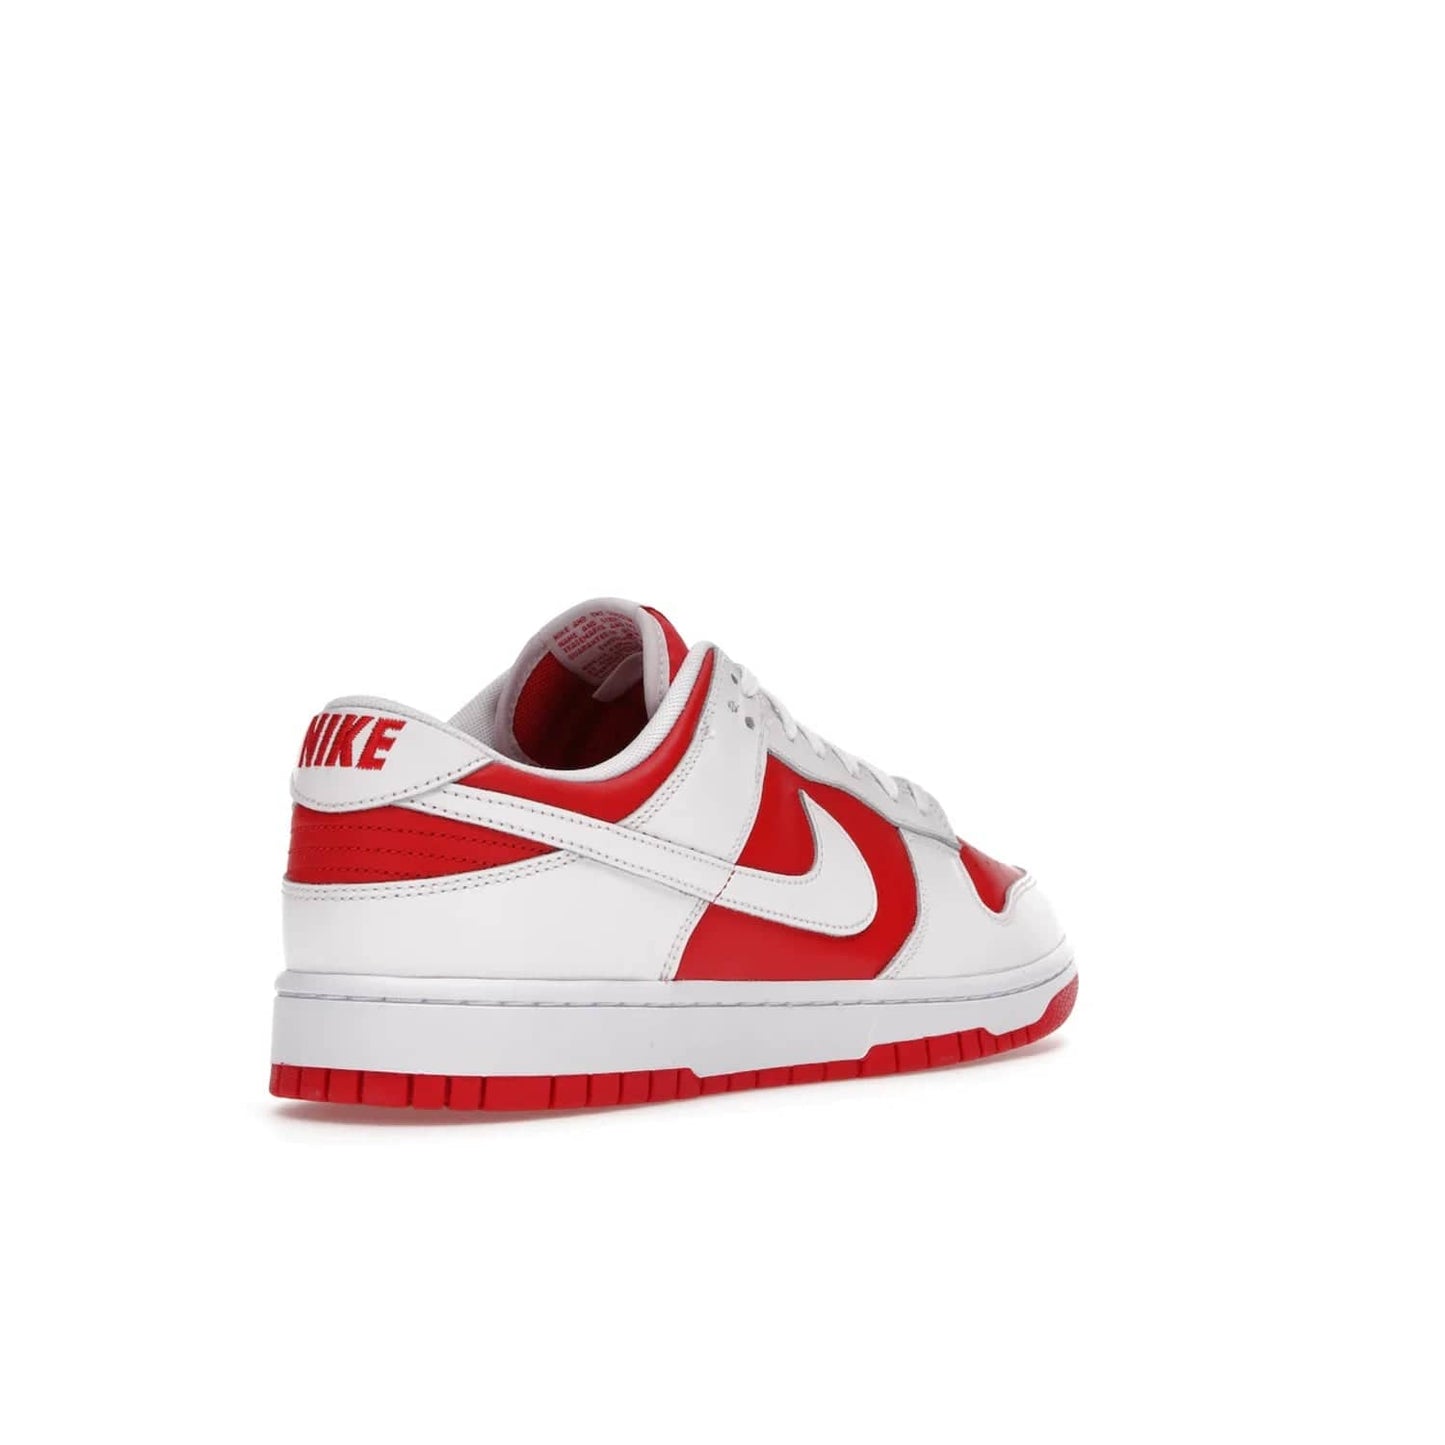 Nike Dunk Low Championship Red (2021) - Image 32 - Only at www.BallersClubKickz.com - A bold and stylish Nike Dunk Low Championship Red from 2021 with a classic retro design. University Red upper, white leather overlays and Swooshes, and a woven tongue label. Make a statement with these sleek kicks!